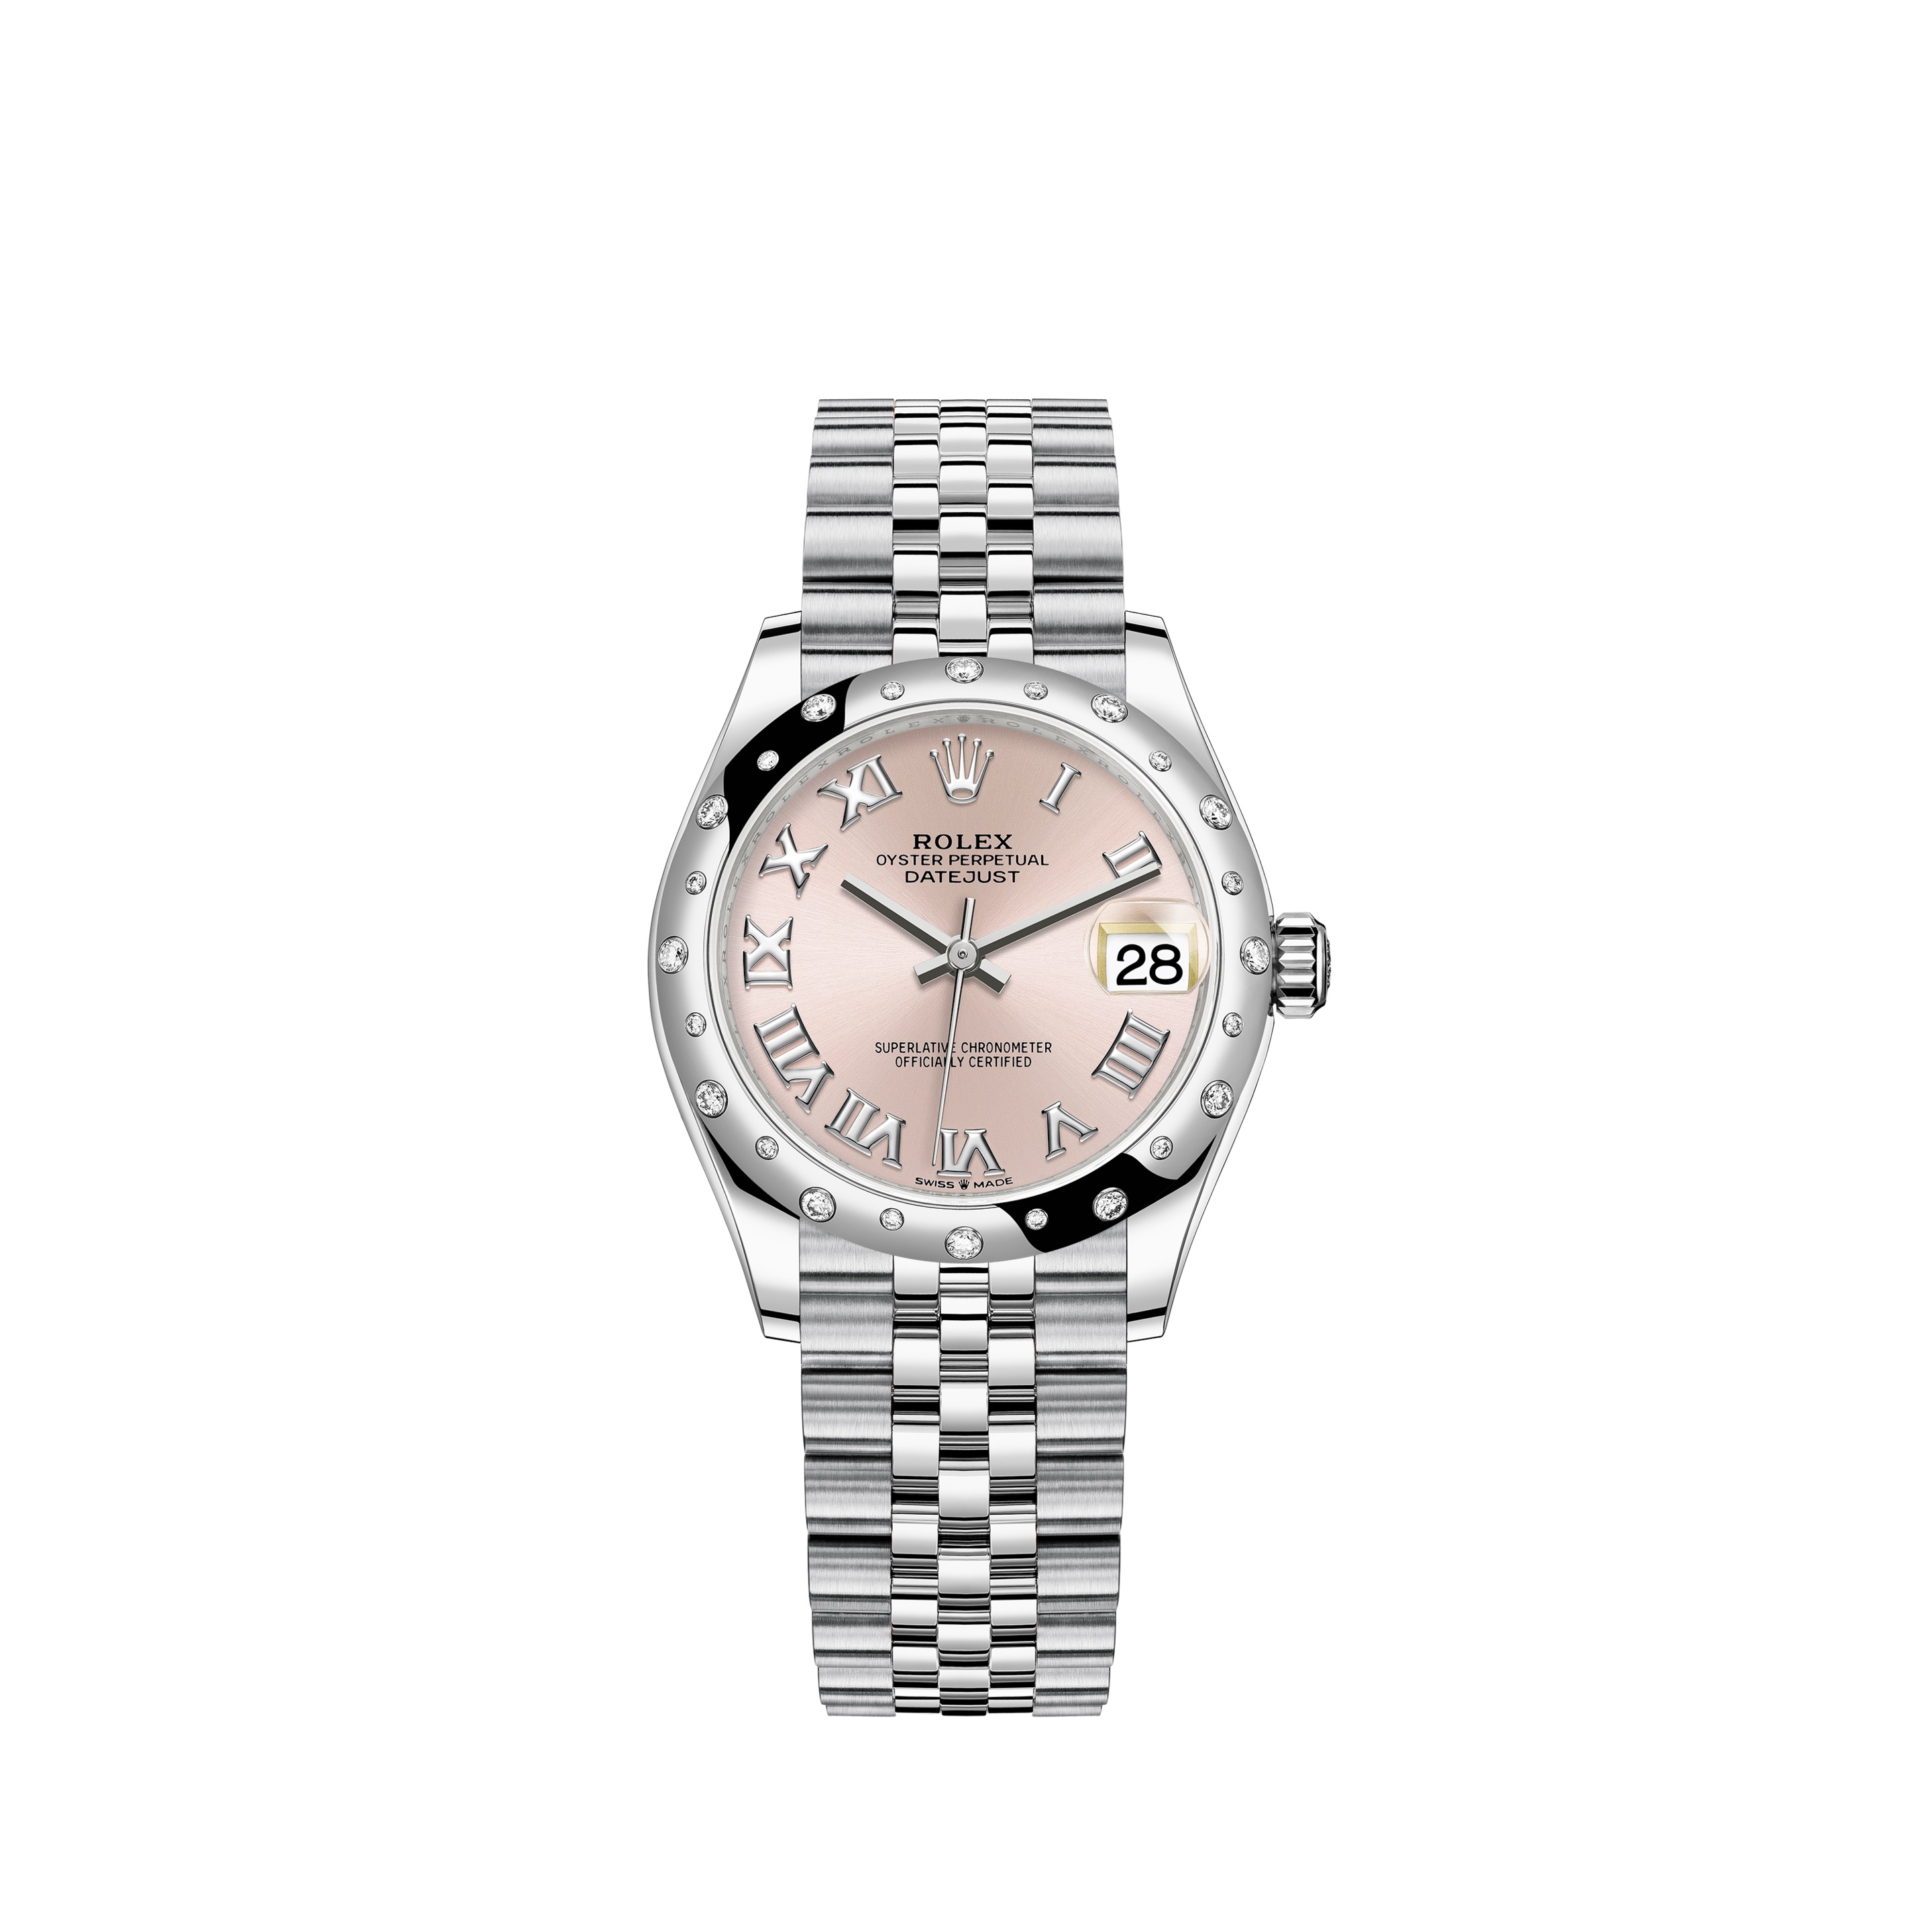 Datejust 31 278344RBR White Gold & Stainless Steel Watch (Pink)